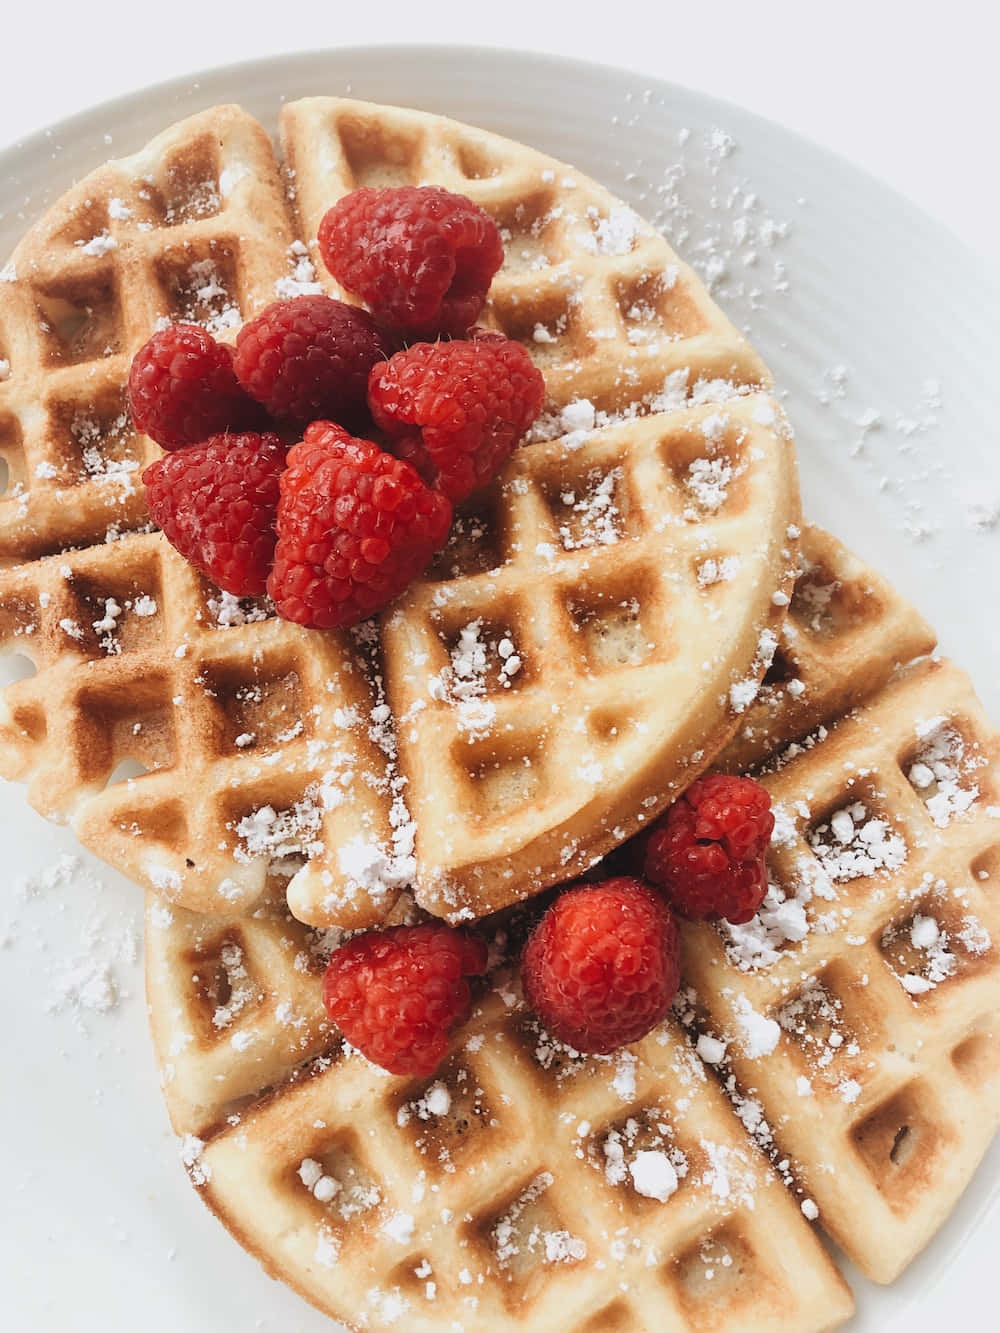 Take a Bite Out of This Delicious Waffle